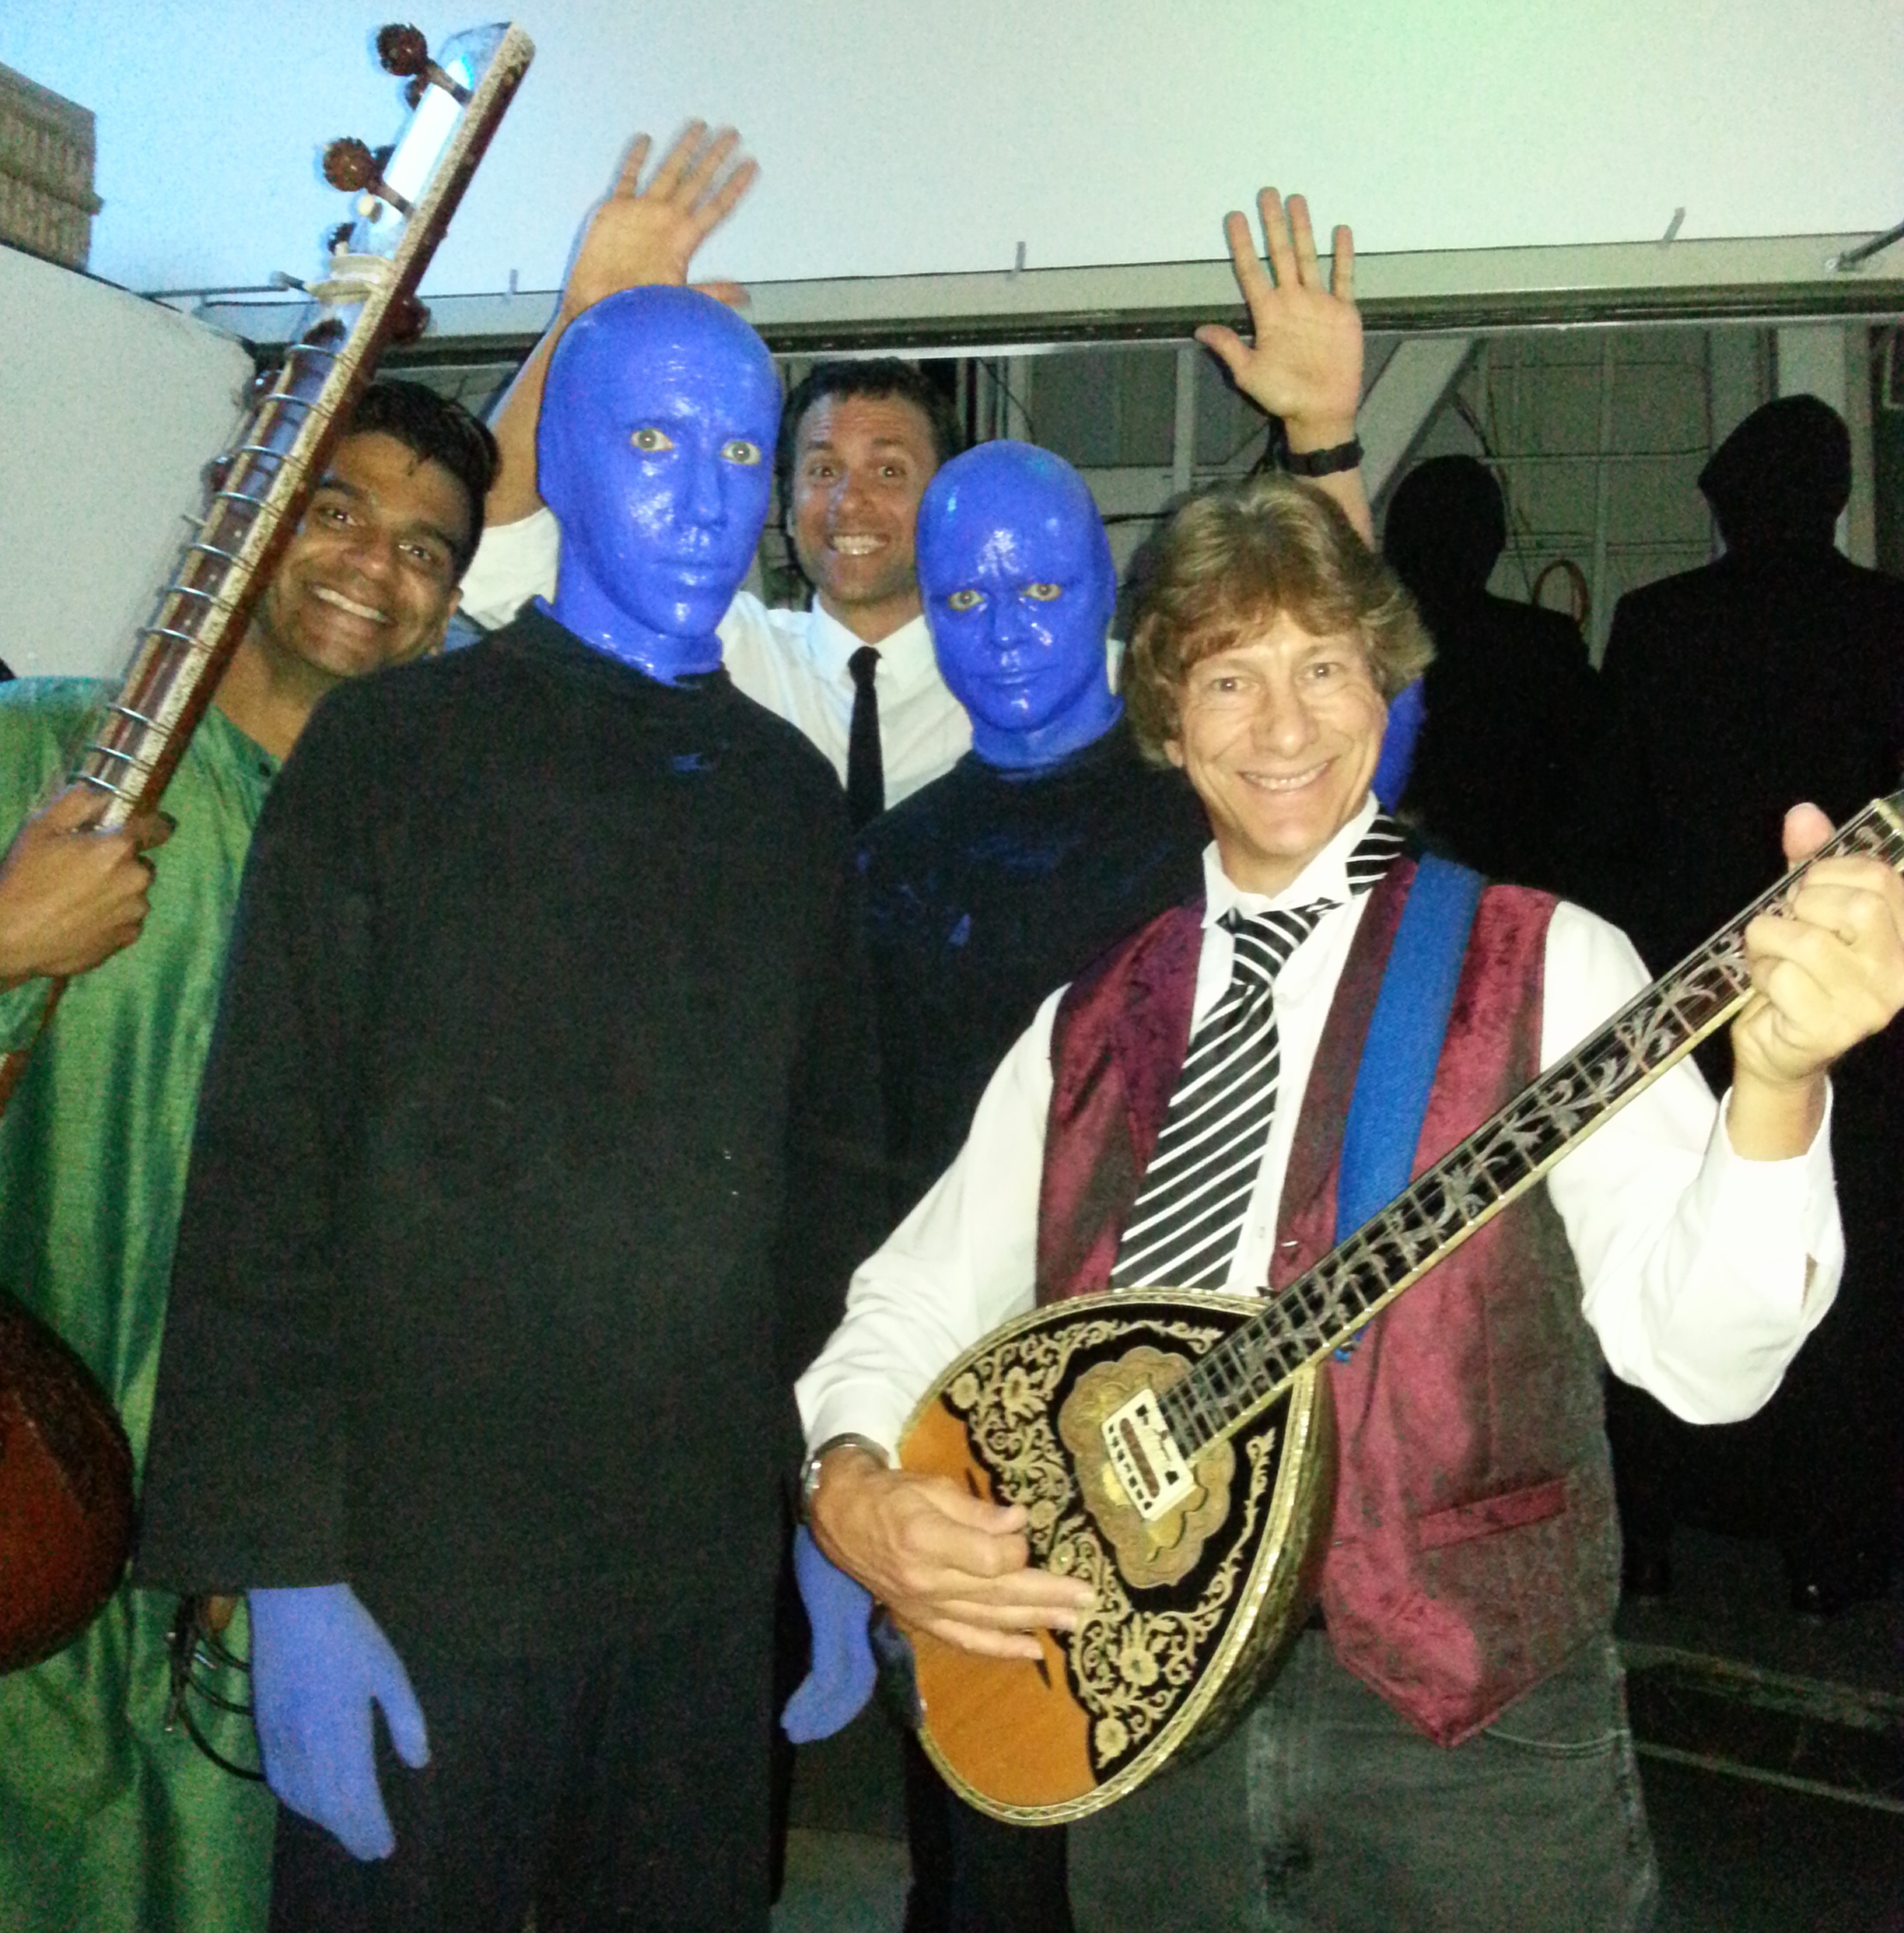 Richárd Bernard performing with Blue Man Group at the Hollywood Bowl